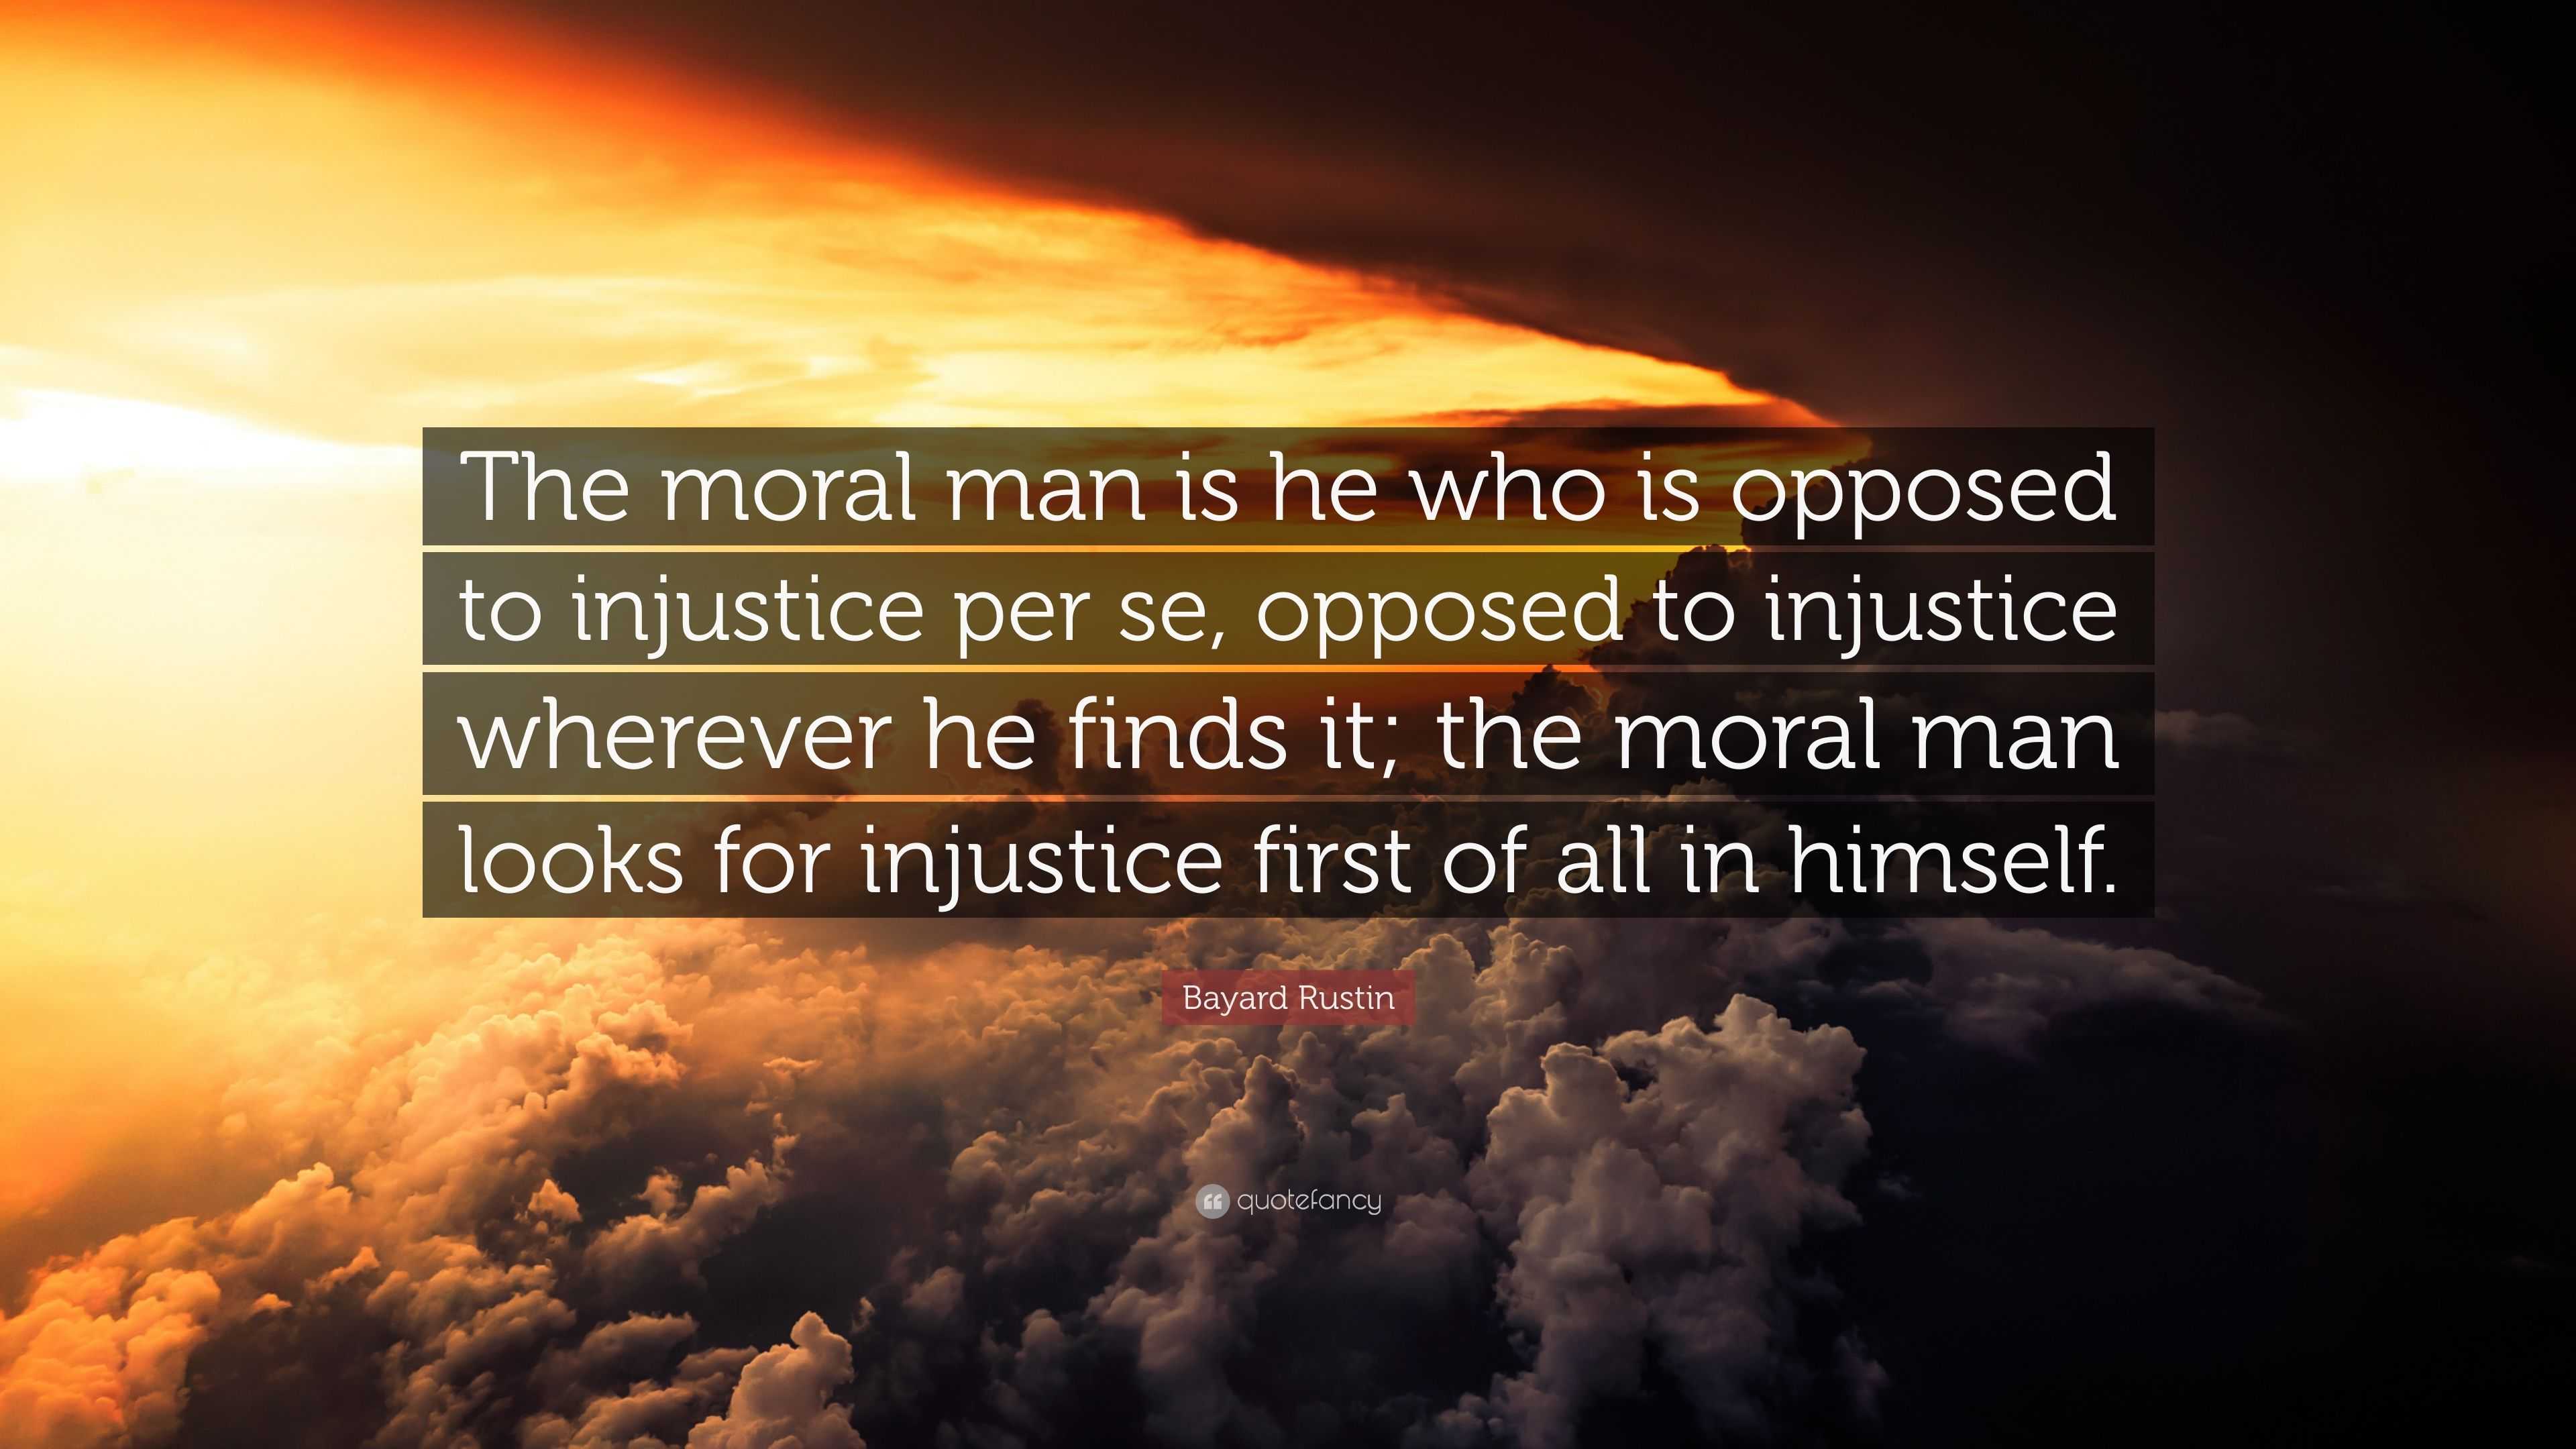 3381019 Bayard Rustin Quote The moral man is he who is opposed to